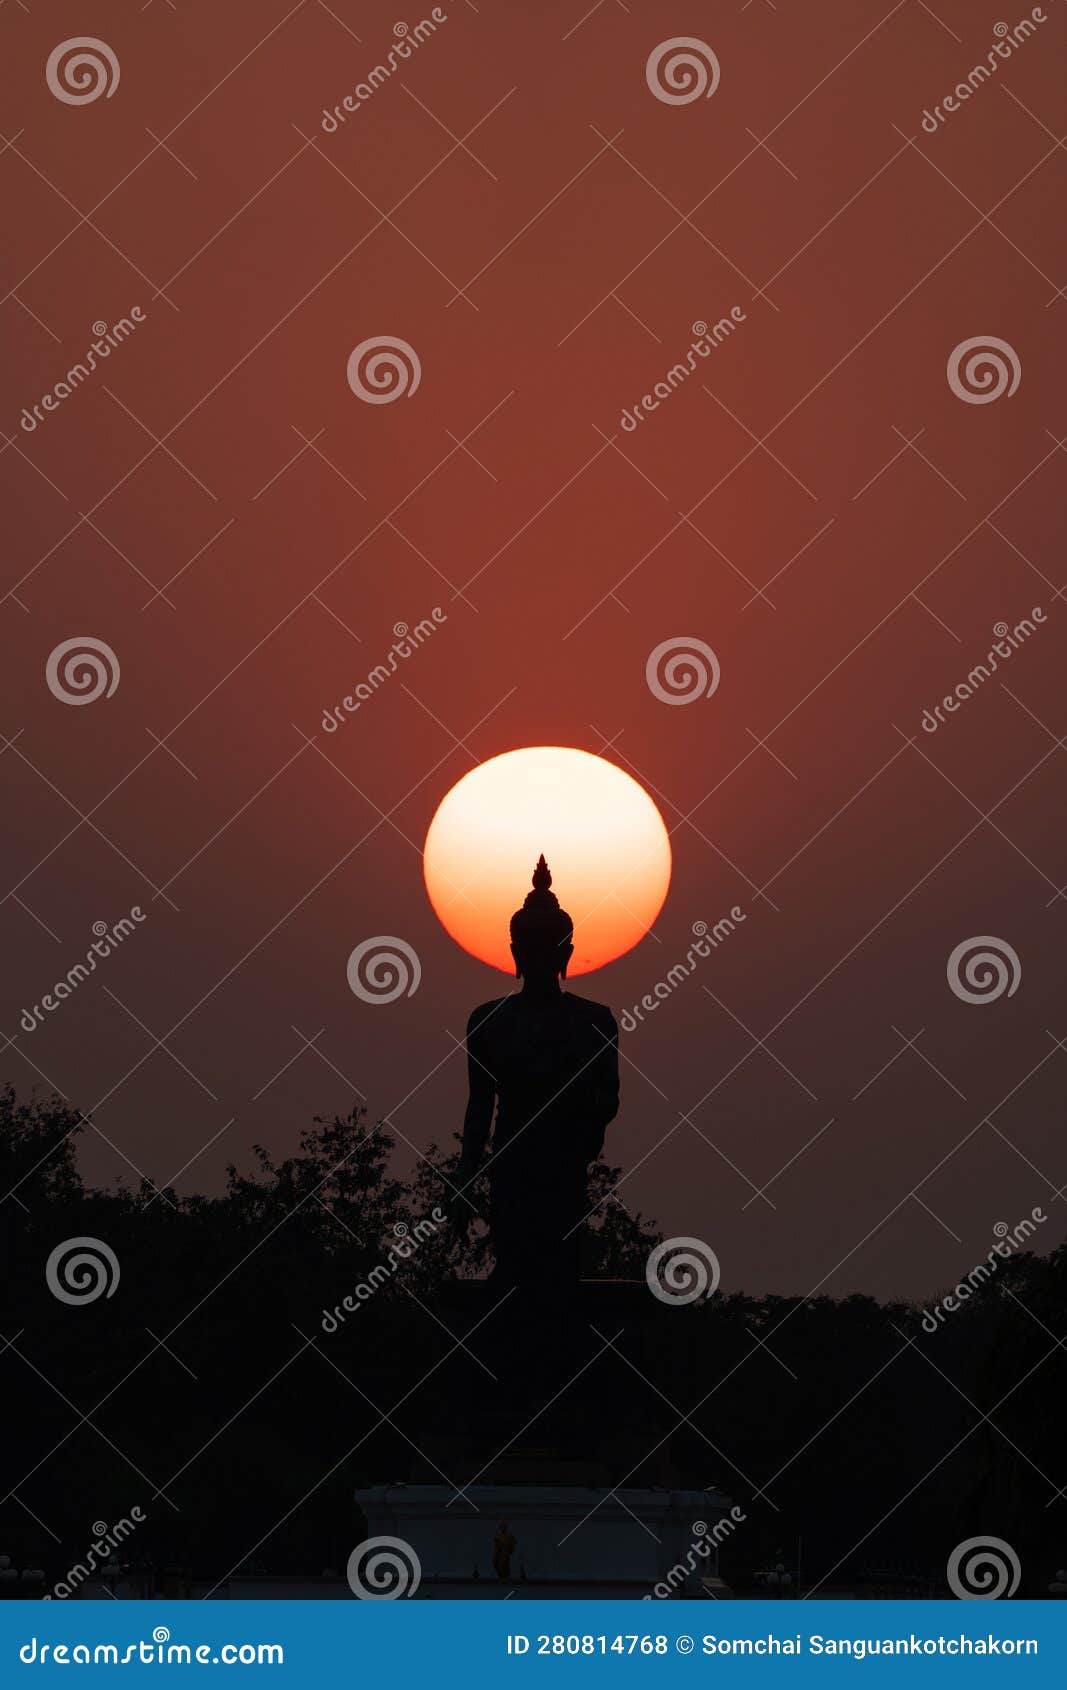 head of statue of buddha image surrounded by sun during sunset